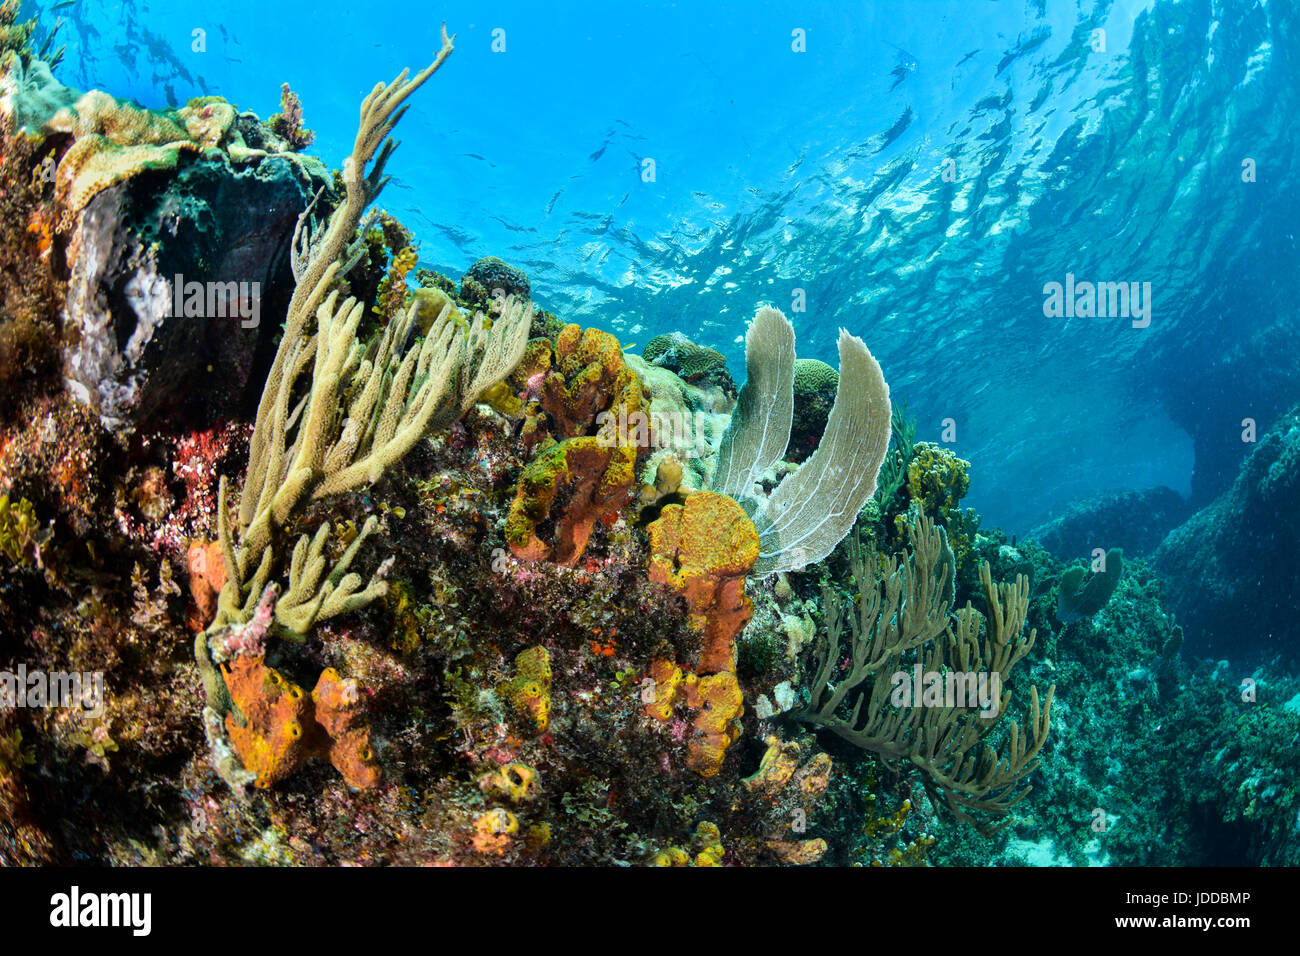 Underwater scene with colorful reef and sunlight on surface Stock Photo